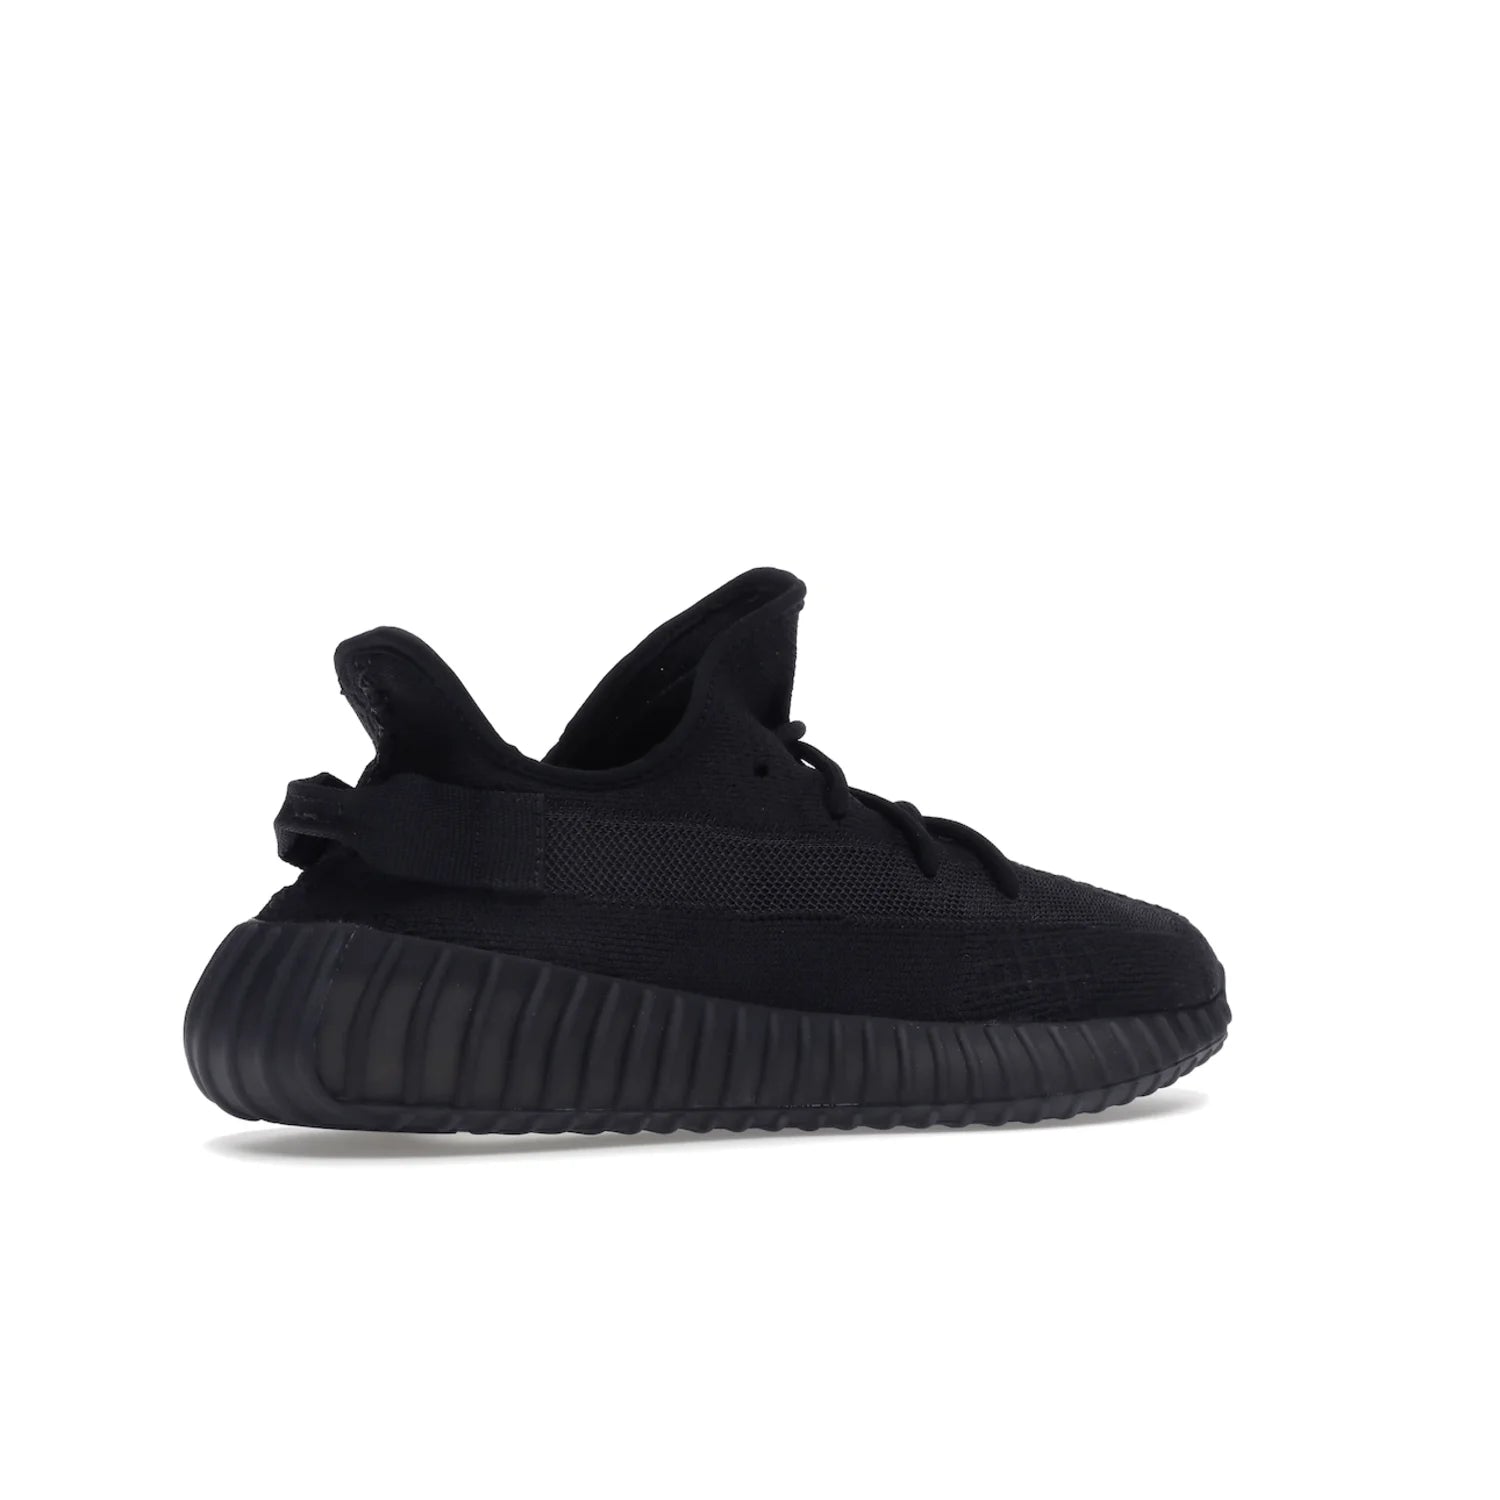 adidas Yeezy Boost 350 V2 Onyx - Image 34 - Only at www.BallersClubKickz.com - Adidas Yeezy Boost 350 V2 Onyx Triple Black shoes for comfort and style. Arriving Spring 2022.